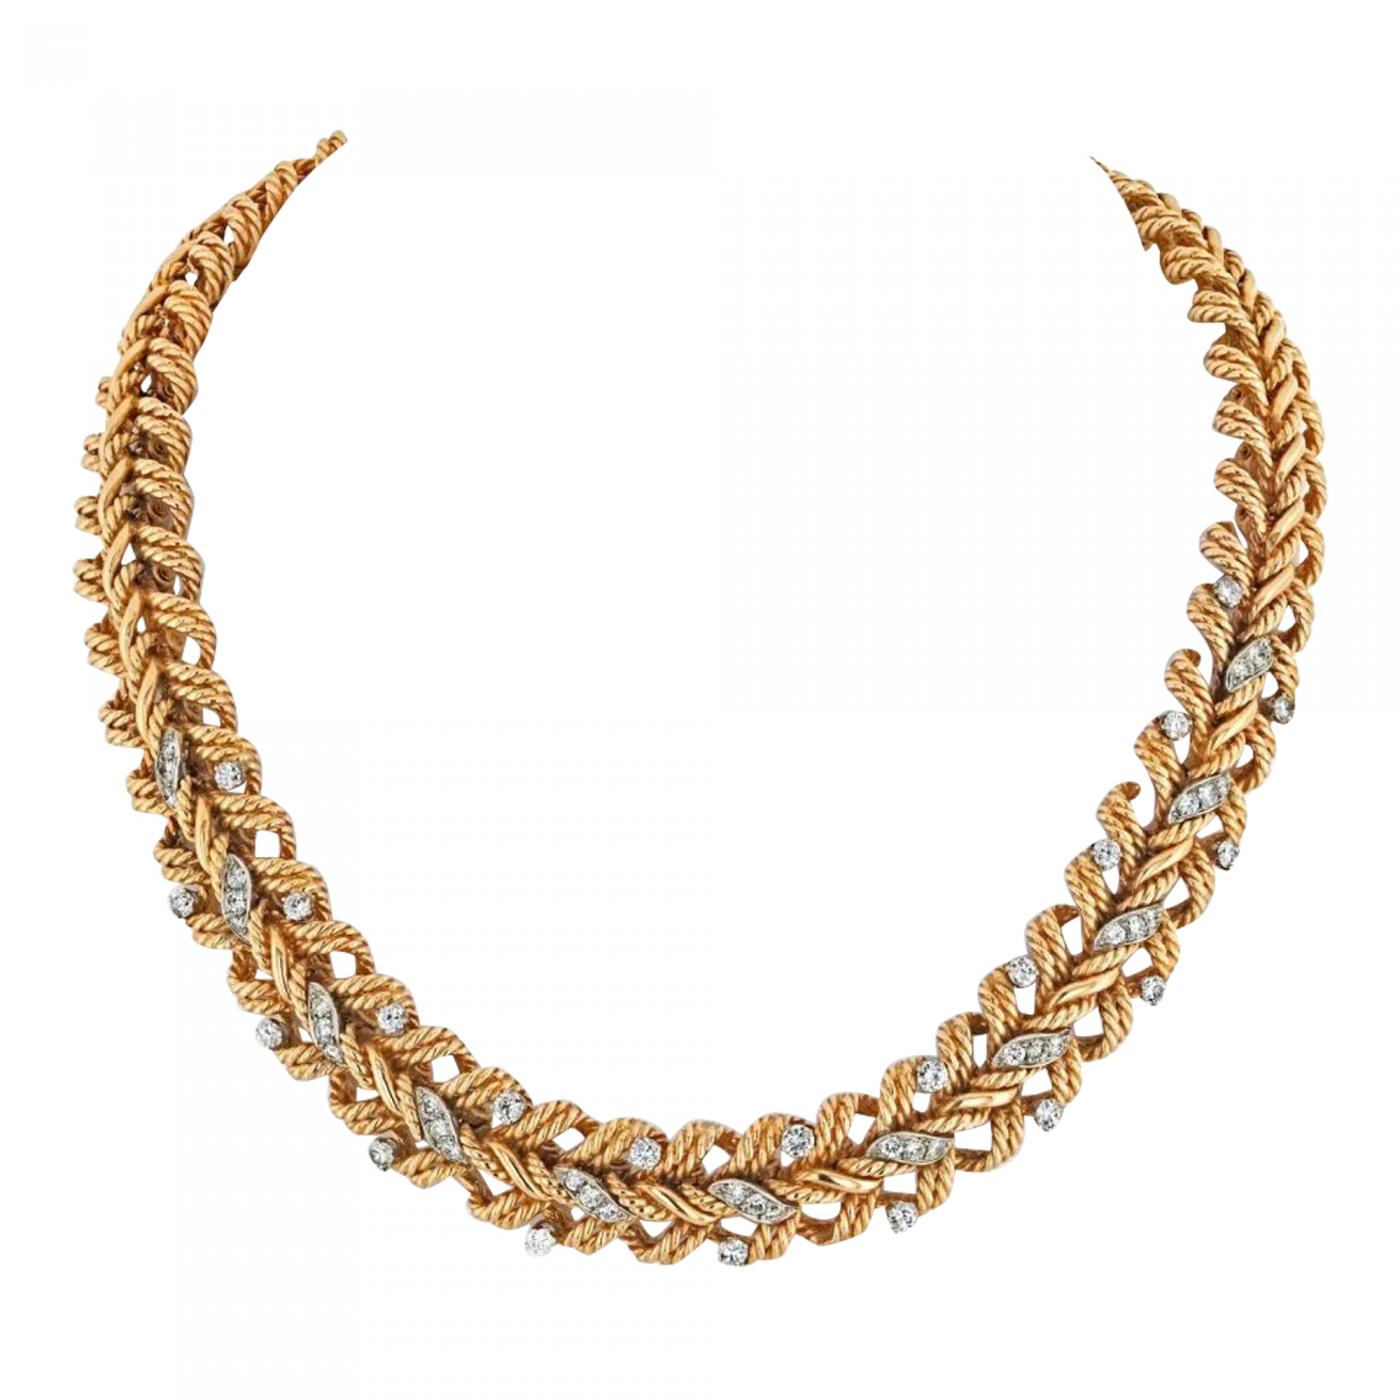 Twist Chain Necklace - Gold – EDGE of EMBER